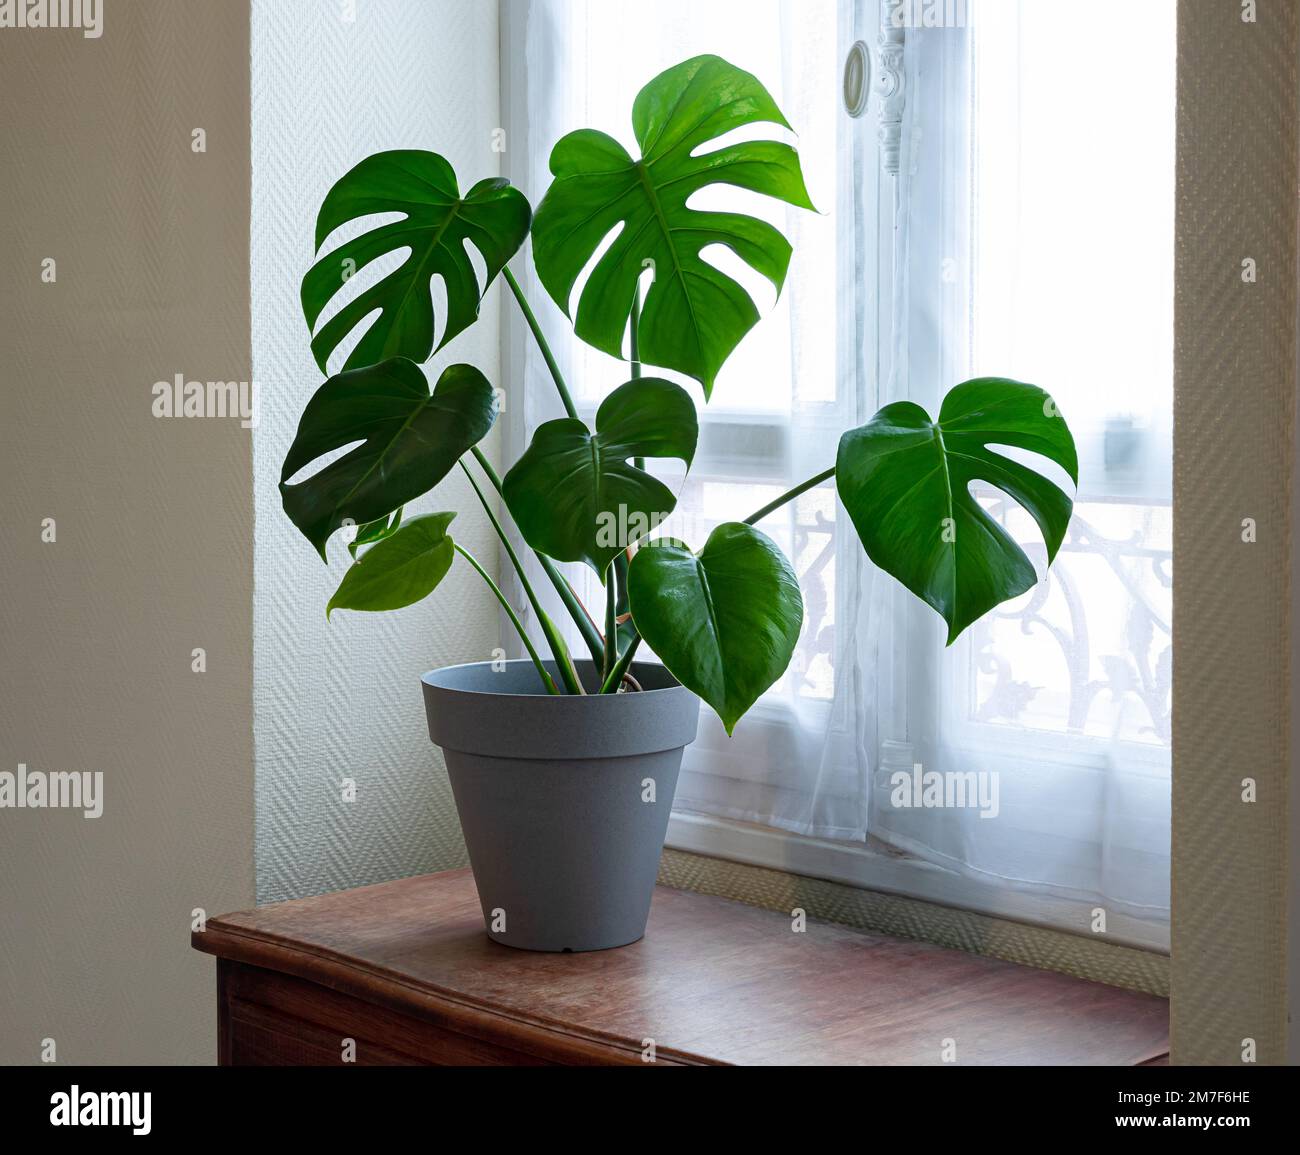 Swiss cheese plant or Monstera deliciosa on an old wooden furniture near the window, urban jungle concept Stock Photo